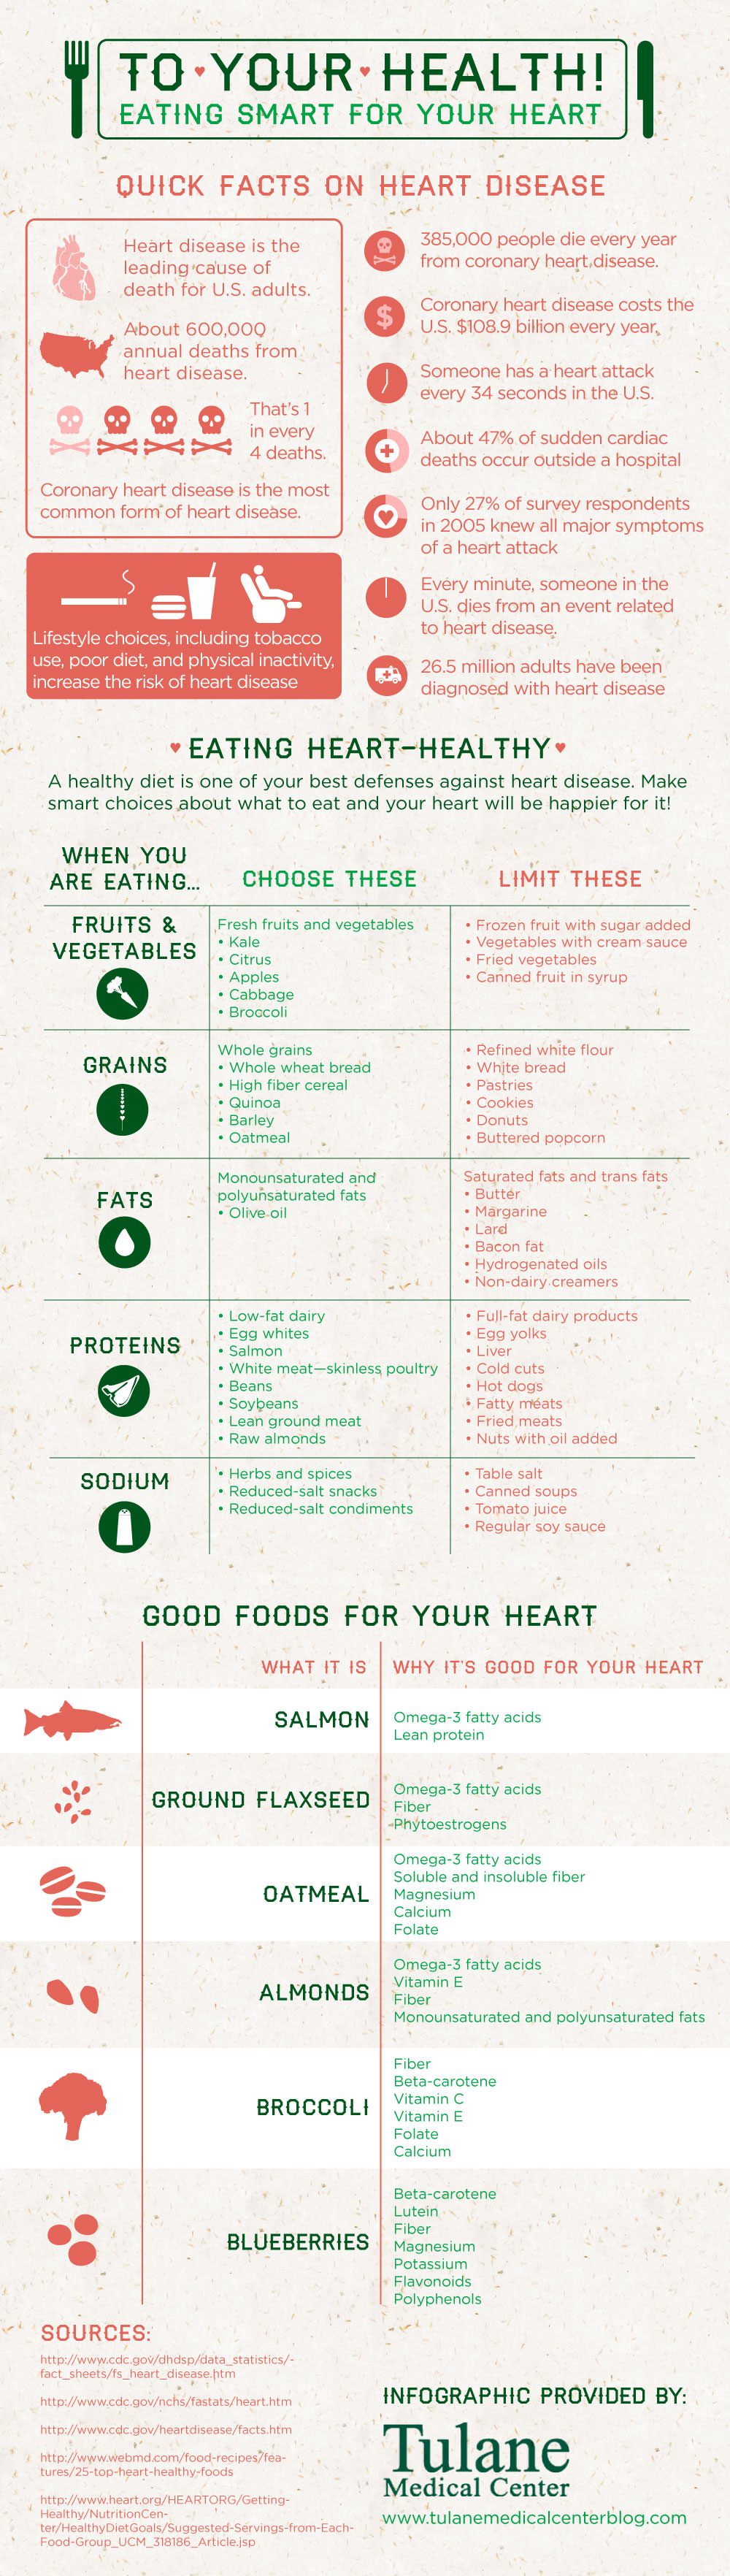 Eating for a Healthy Heart Infographic